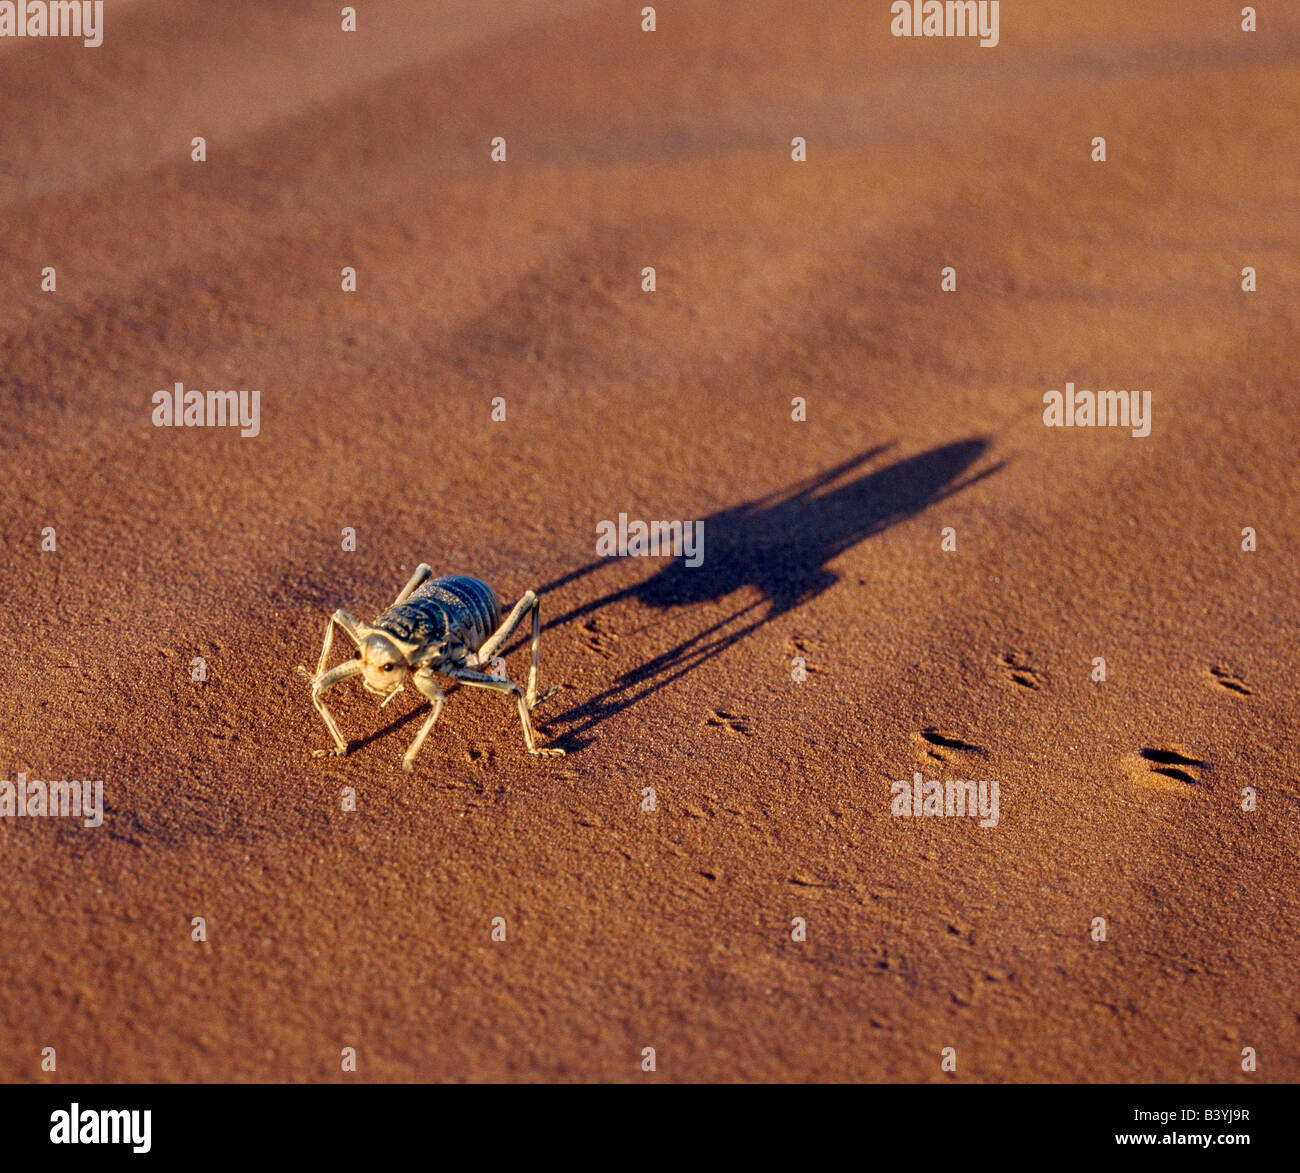 Namibia, Namib Desert, Wolwedans. In late afternoon light, a large dune cricket leaves a tell-tale trail of imprints while casting its long shadow on dunes at Wolvedans, a large private reserve on the edge of the Namib-Naukluft Park. The dunes vary from brick red to apricot and forever change colour with the angle of the sun. Stock Photo